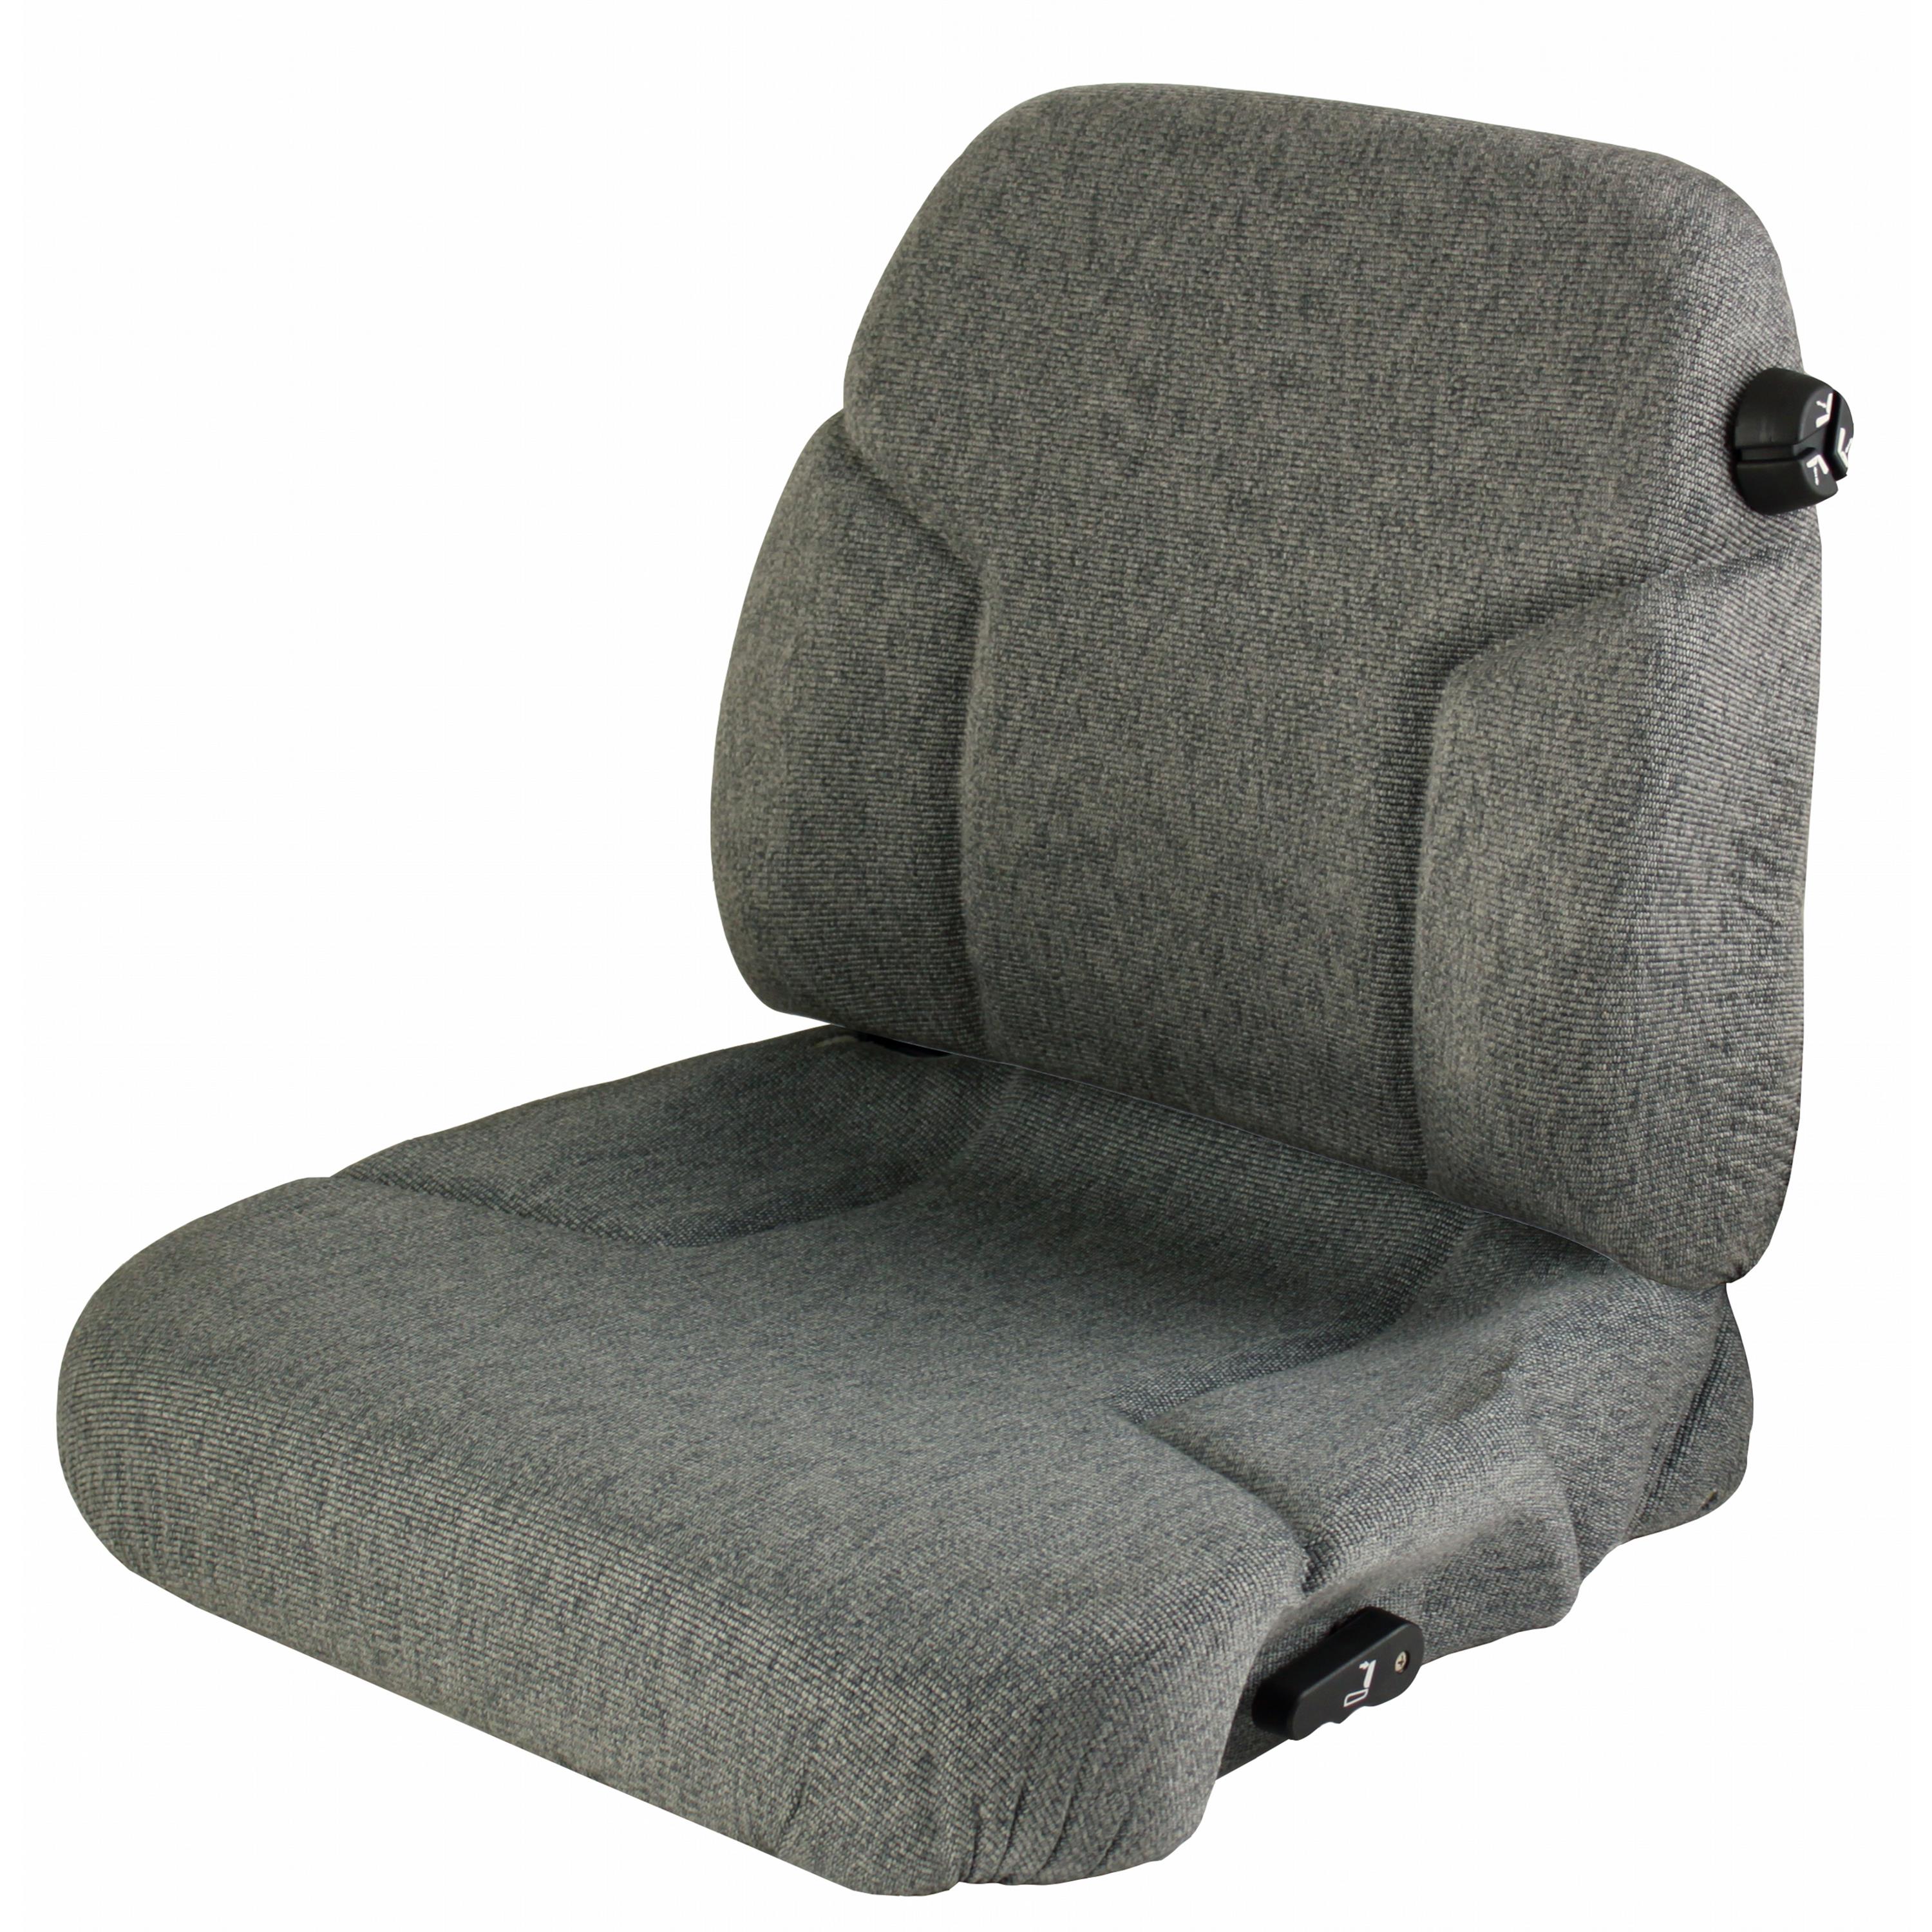 Set of 2 Replacement Seats & Backs